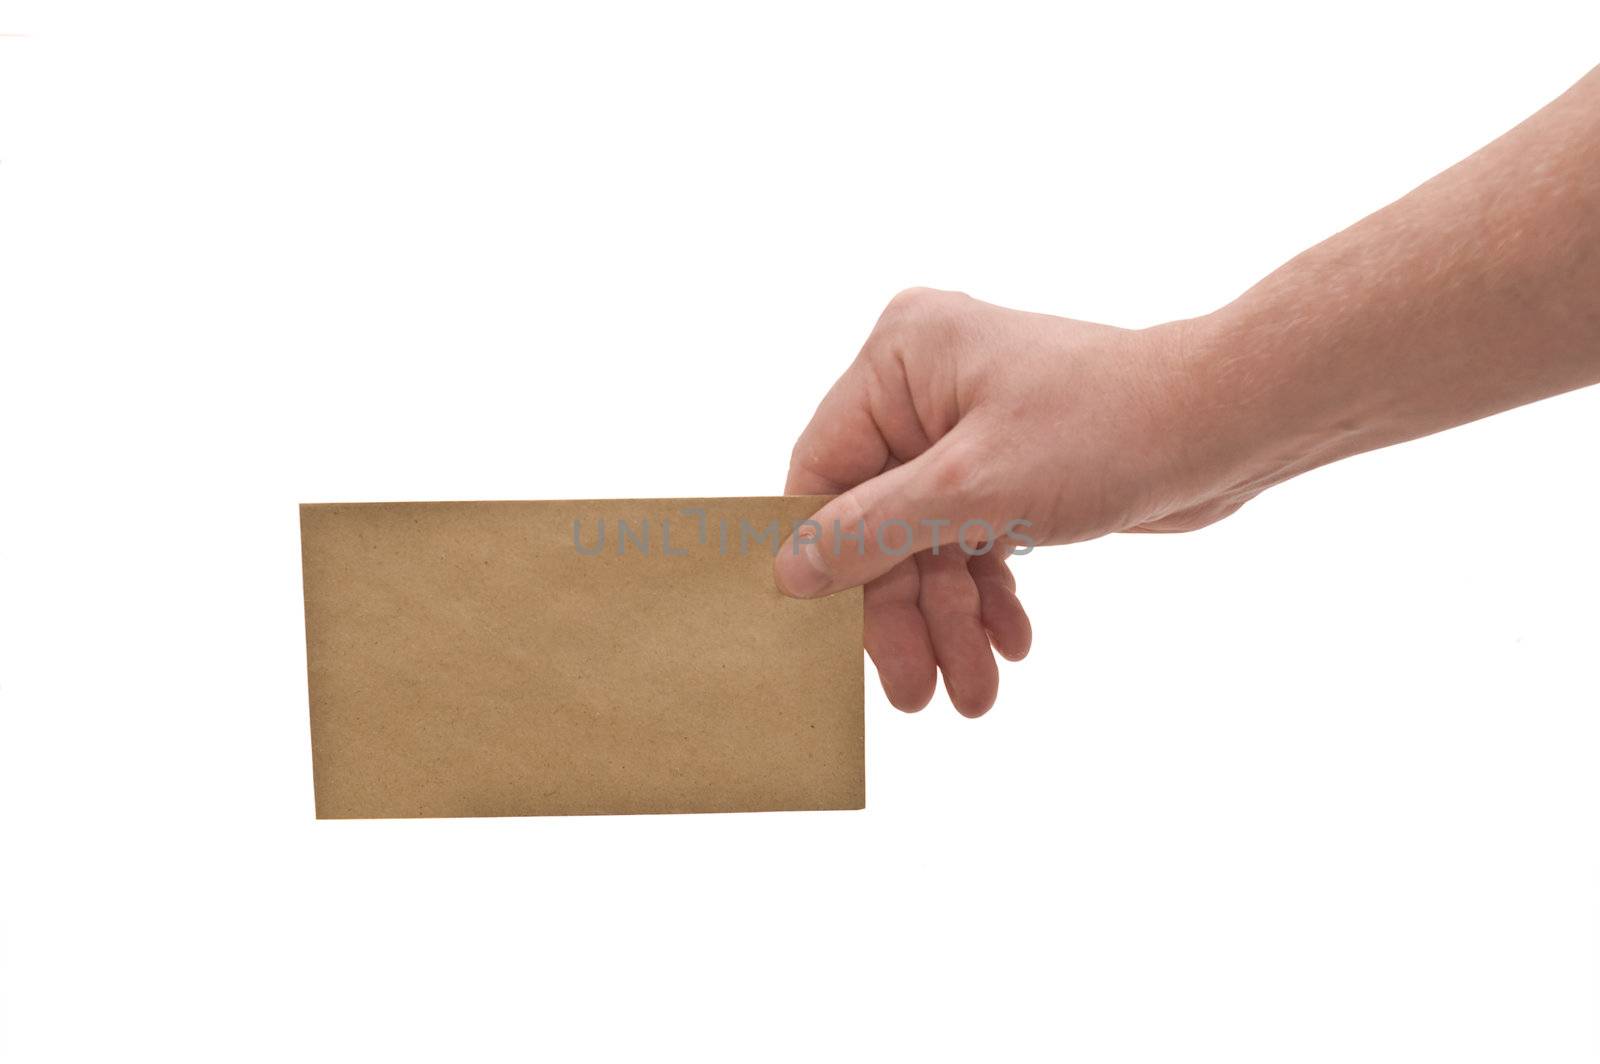 Hand & small envelope by willmetts